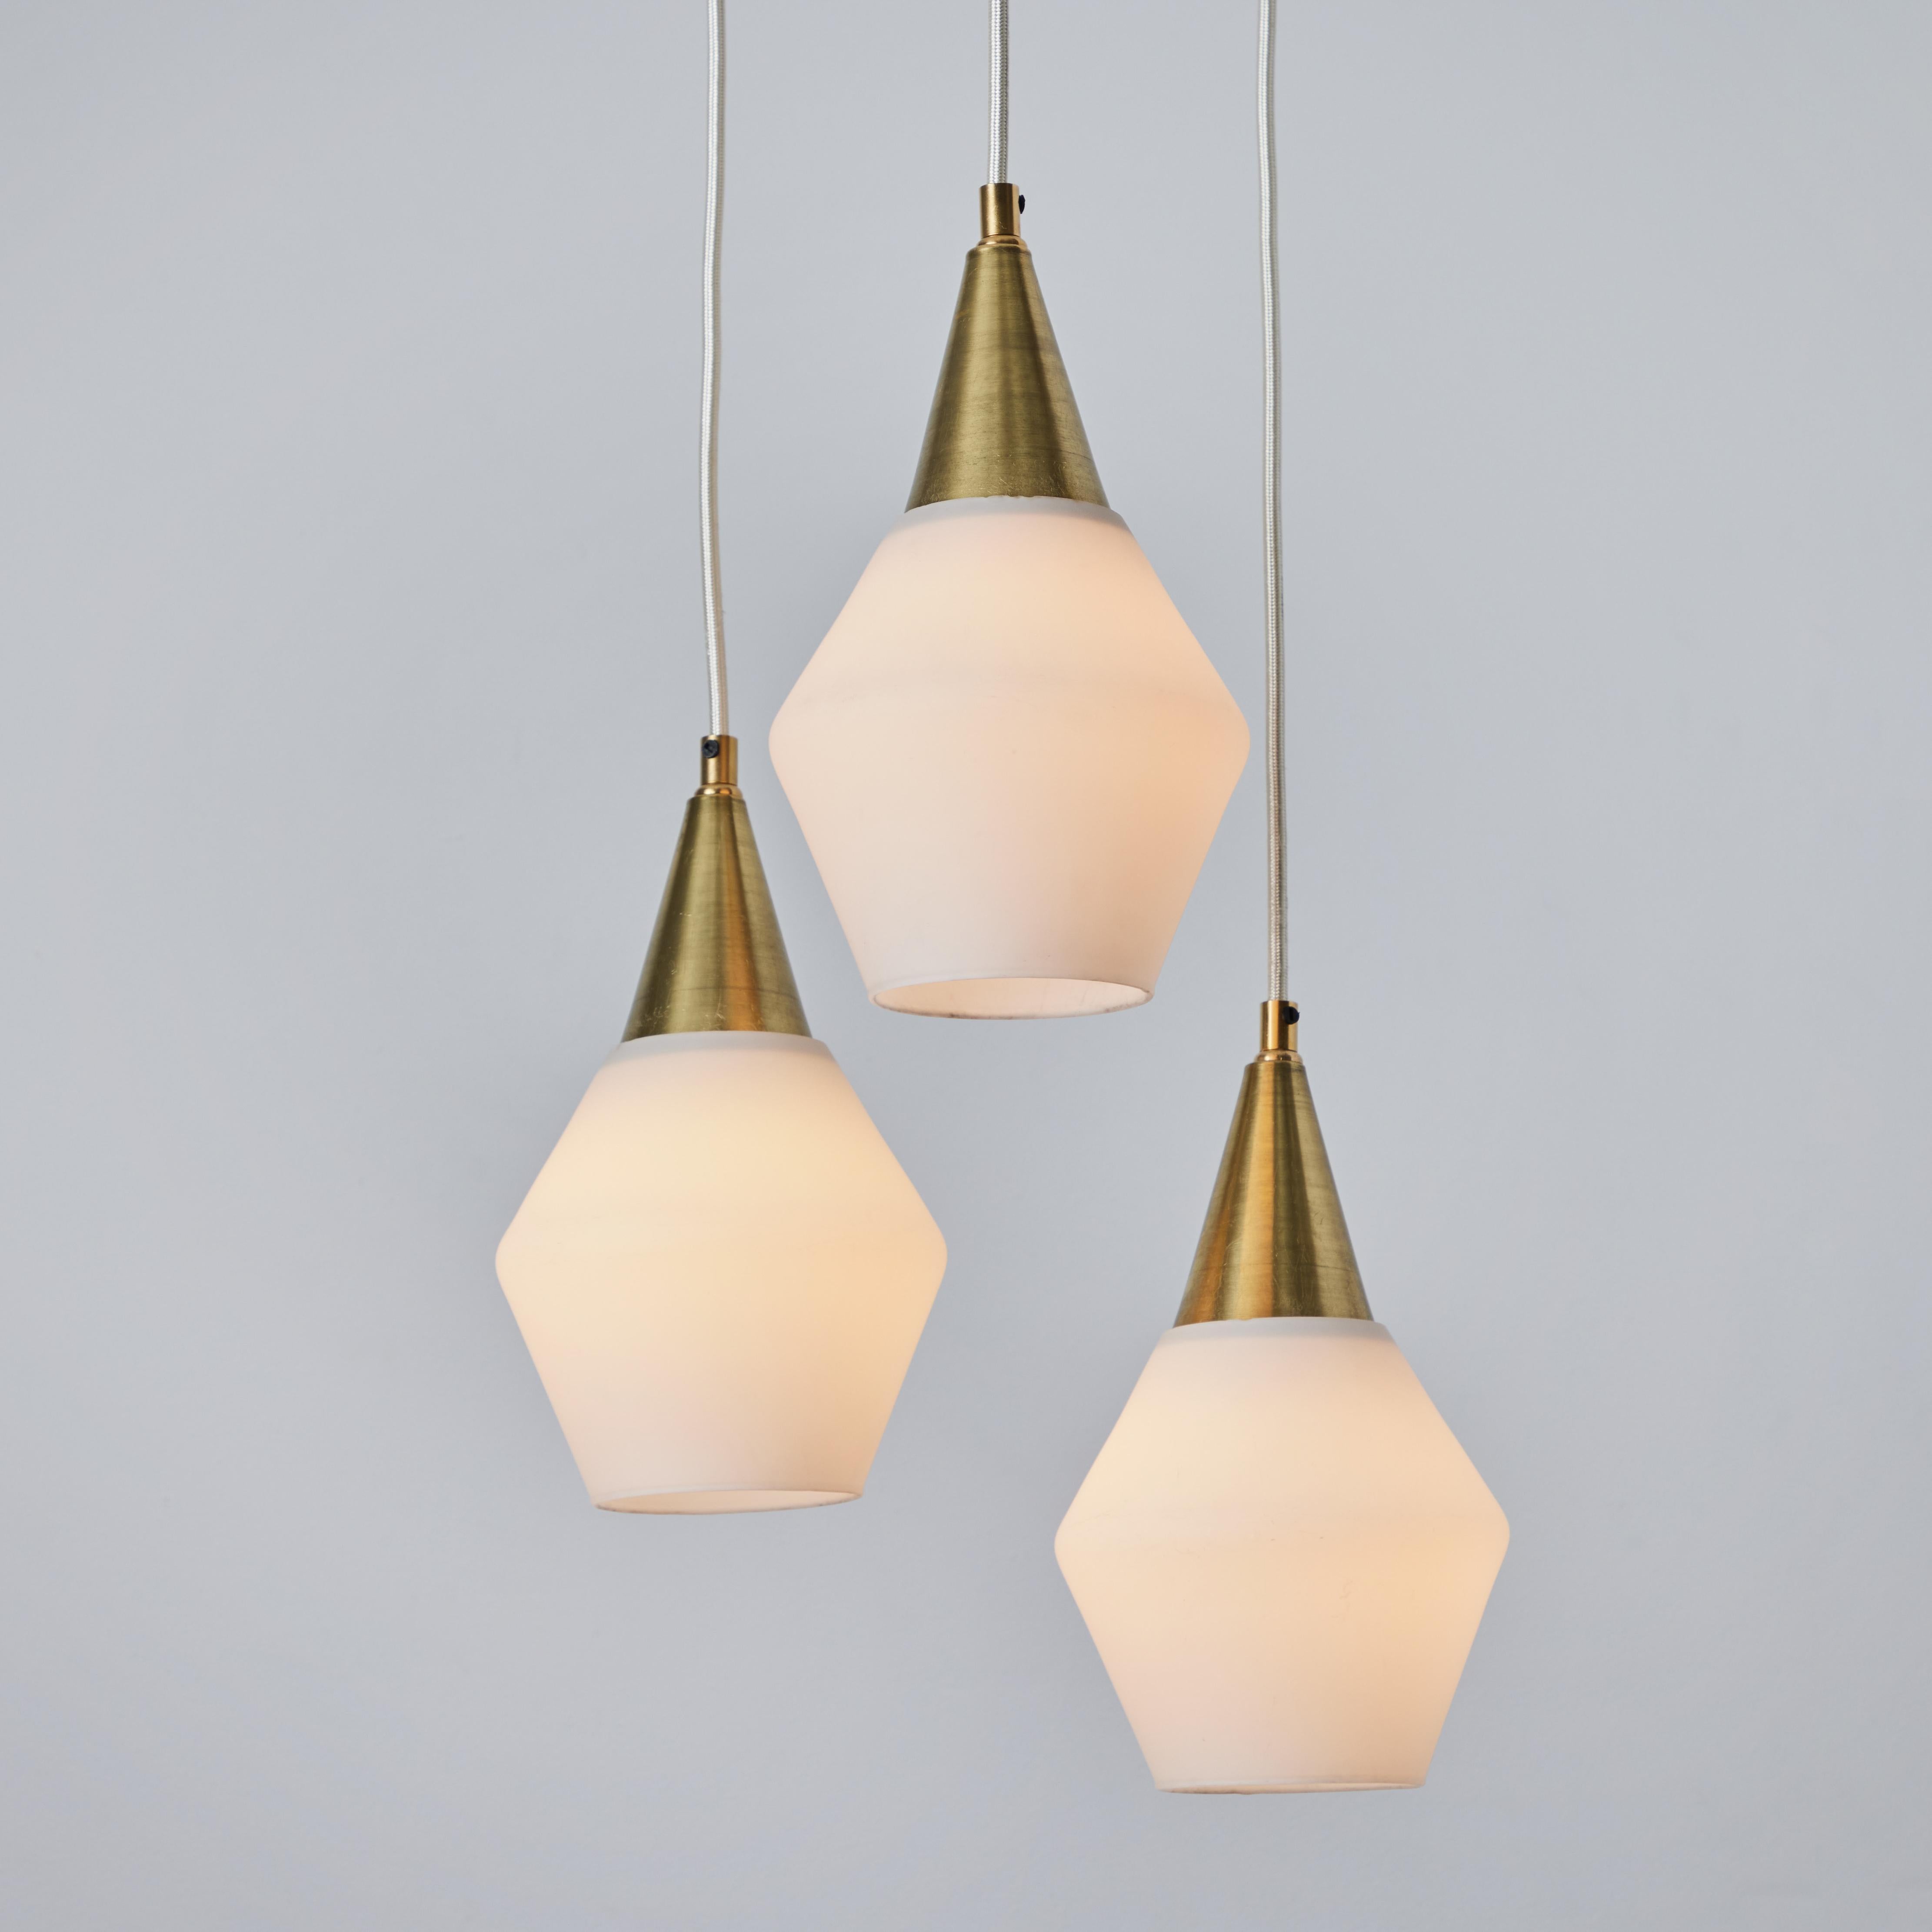 1960s Opaline Glass and Brass Chandelier Attributed to Mauri Almari for Idman For Sale 9